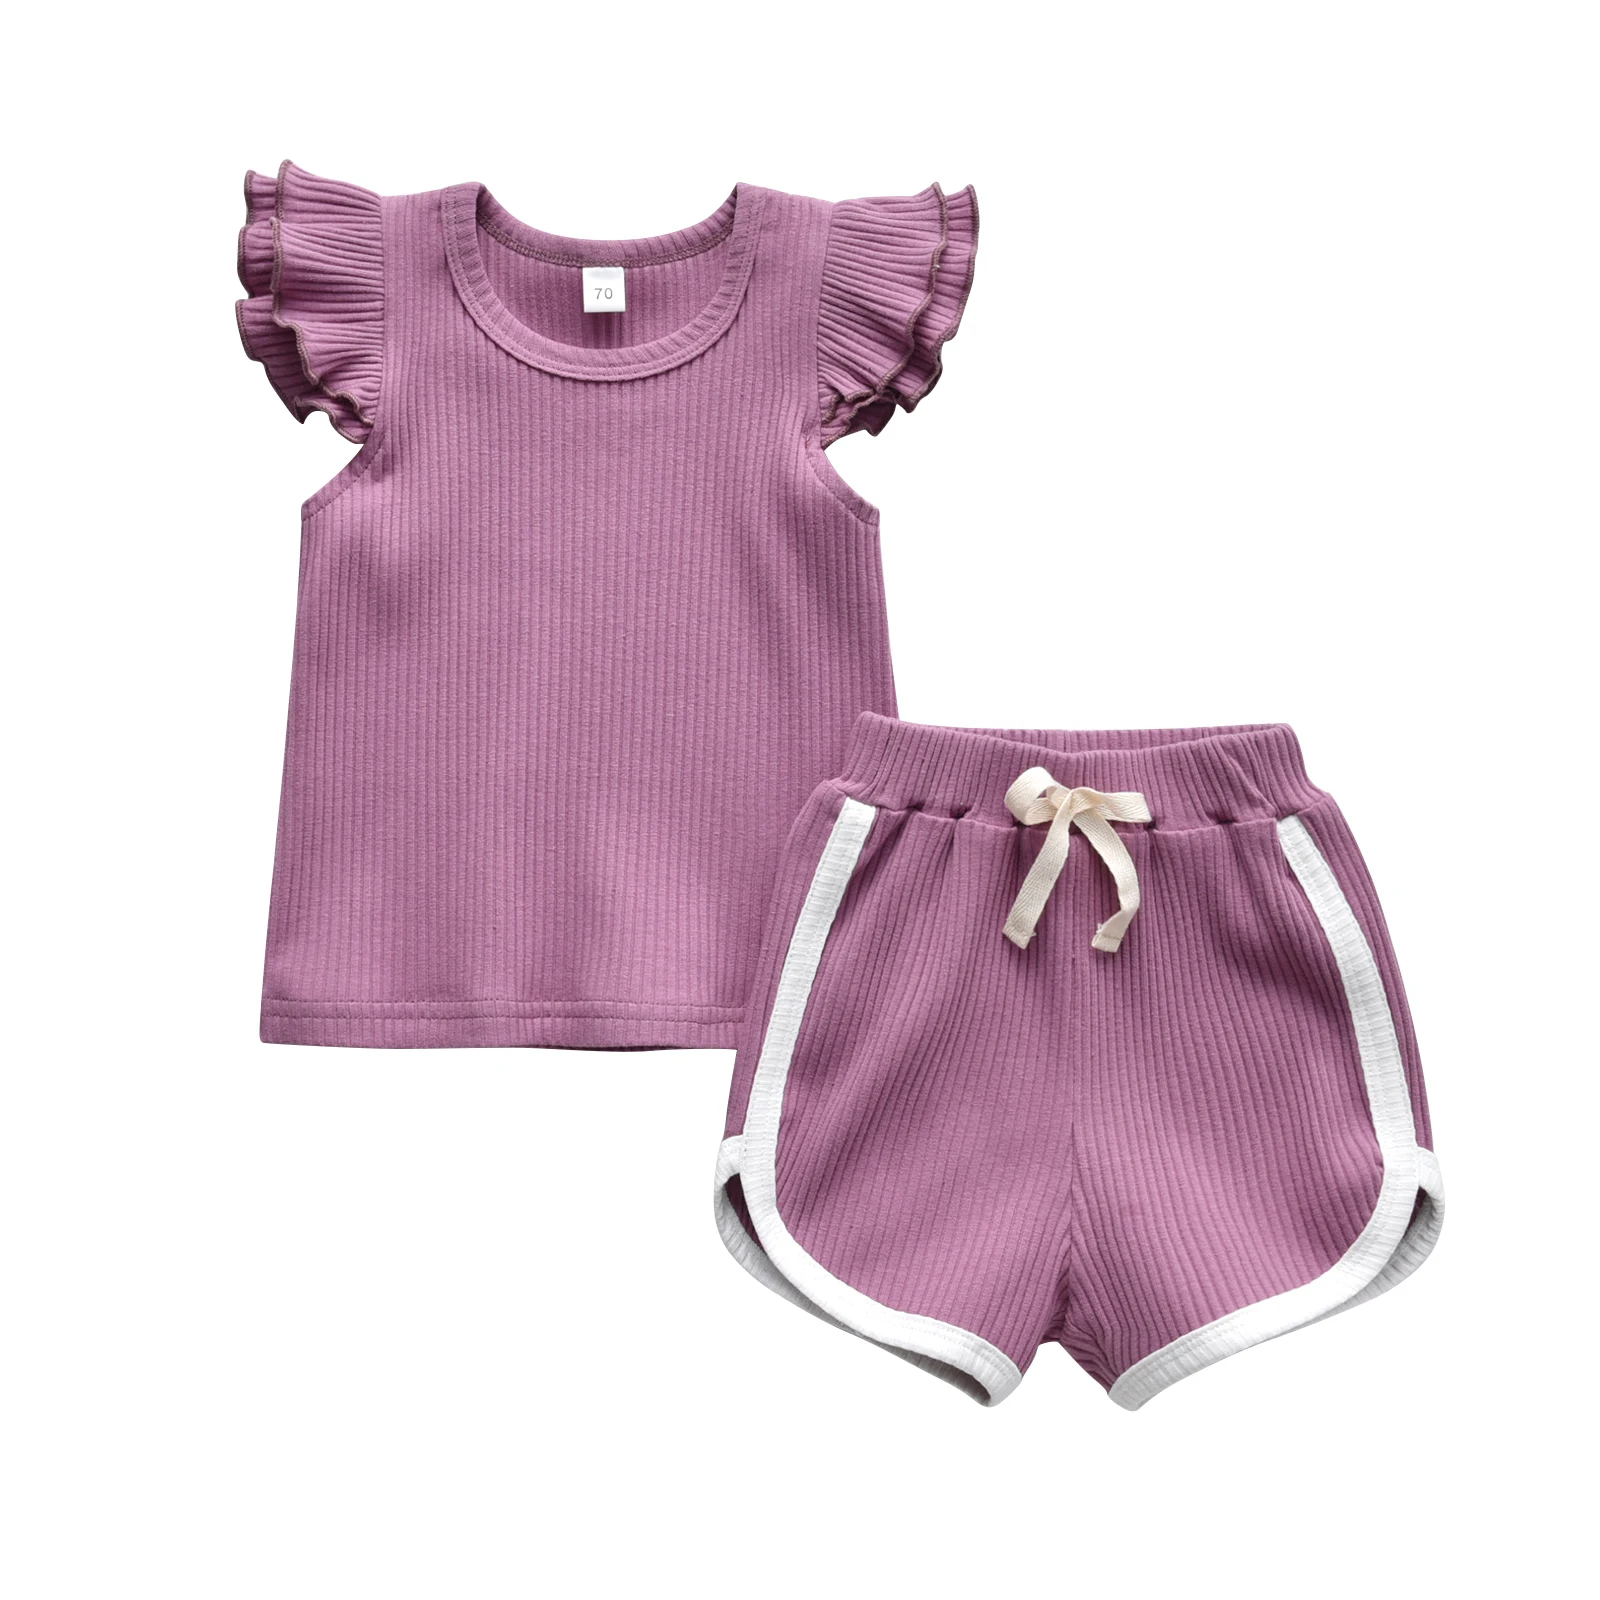 Baby Clothing Set expensive Summer Baby Girl Clothes Set Short Sleeve Solid Color O Neck T-shirt Top and Shorts Pants Knit Two Piece Set Kids Girls Outfits baby clothing set long sleeve	 Baby Clothing Set